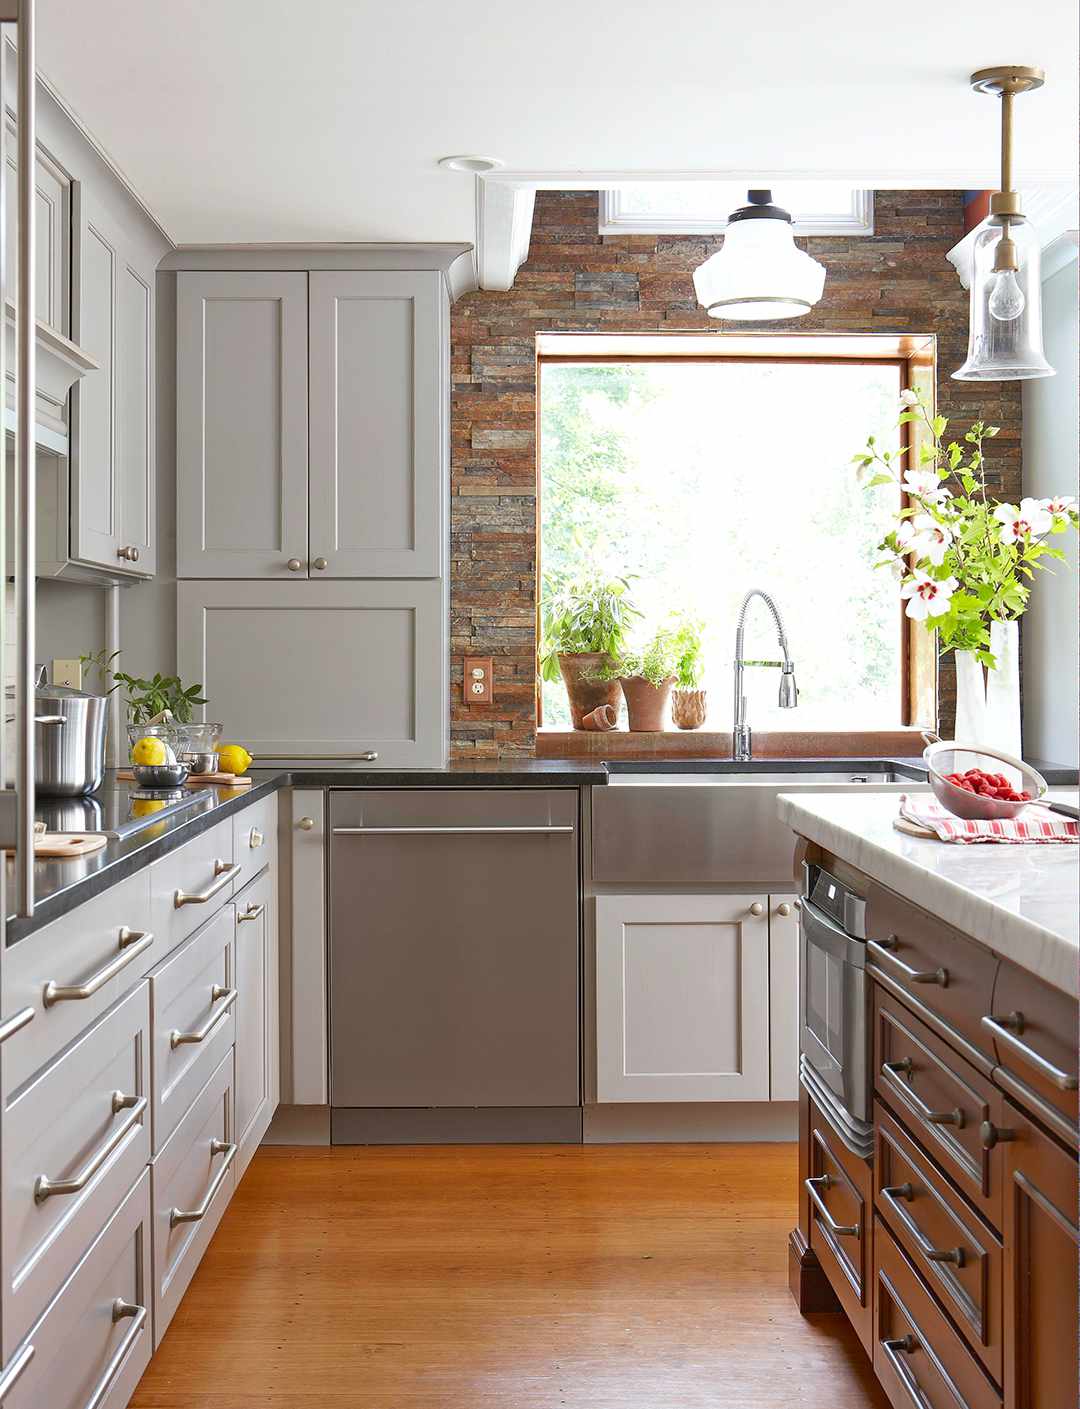 neutral tones kitchen with large window and wood floors